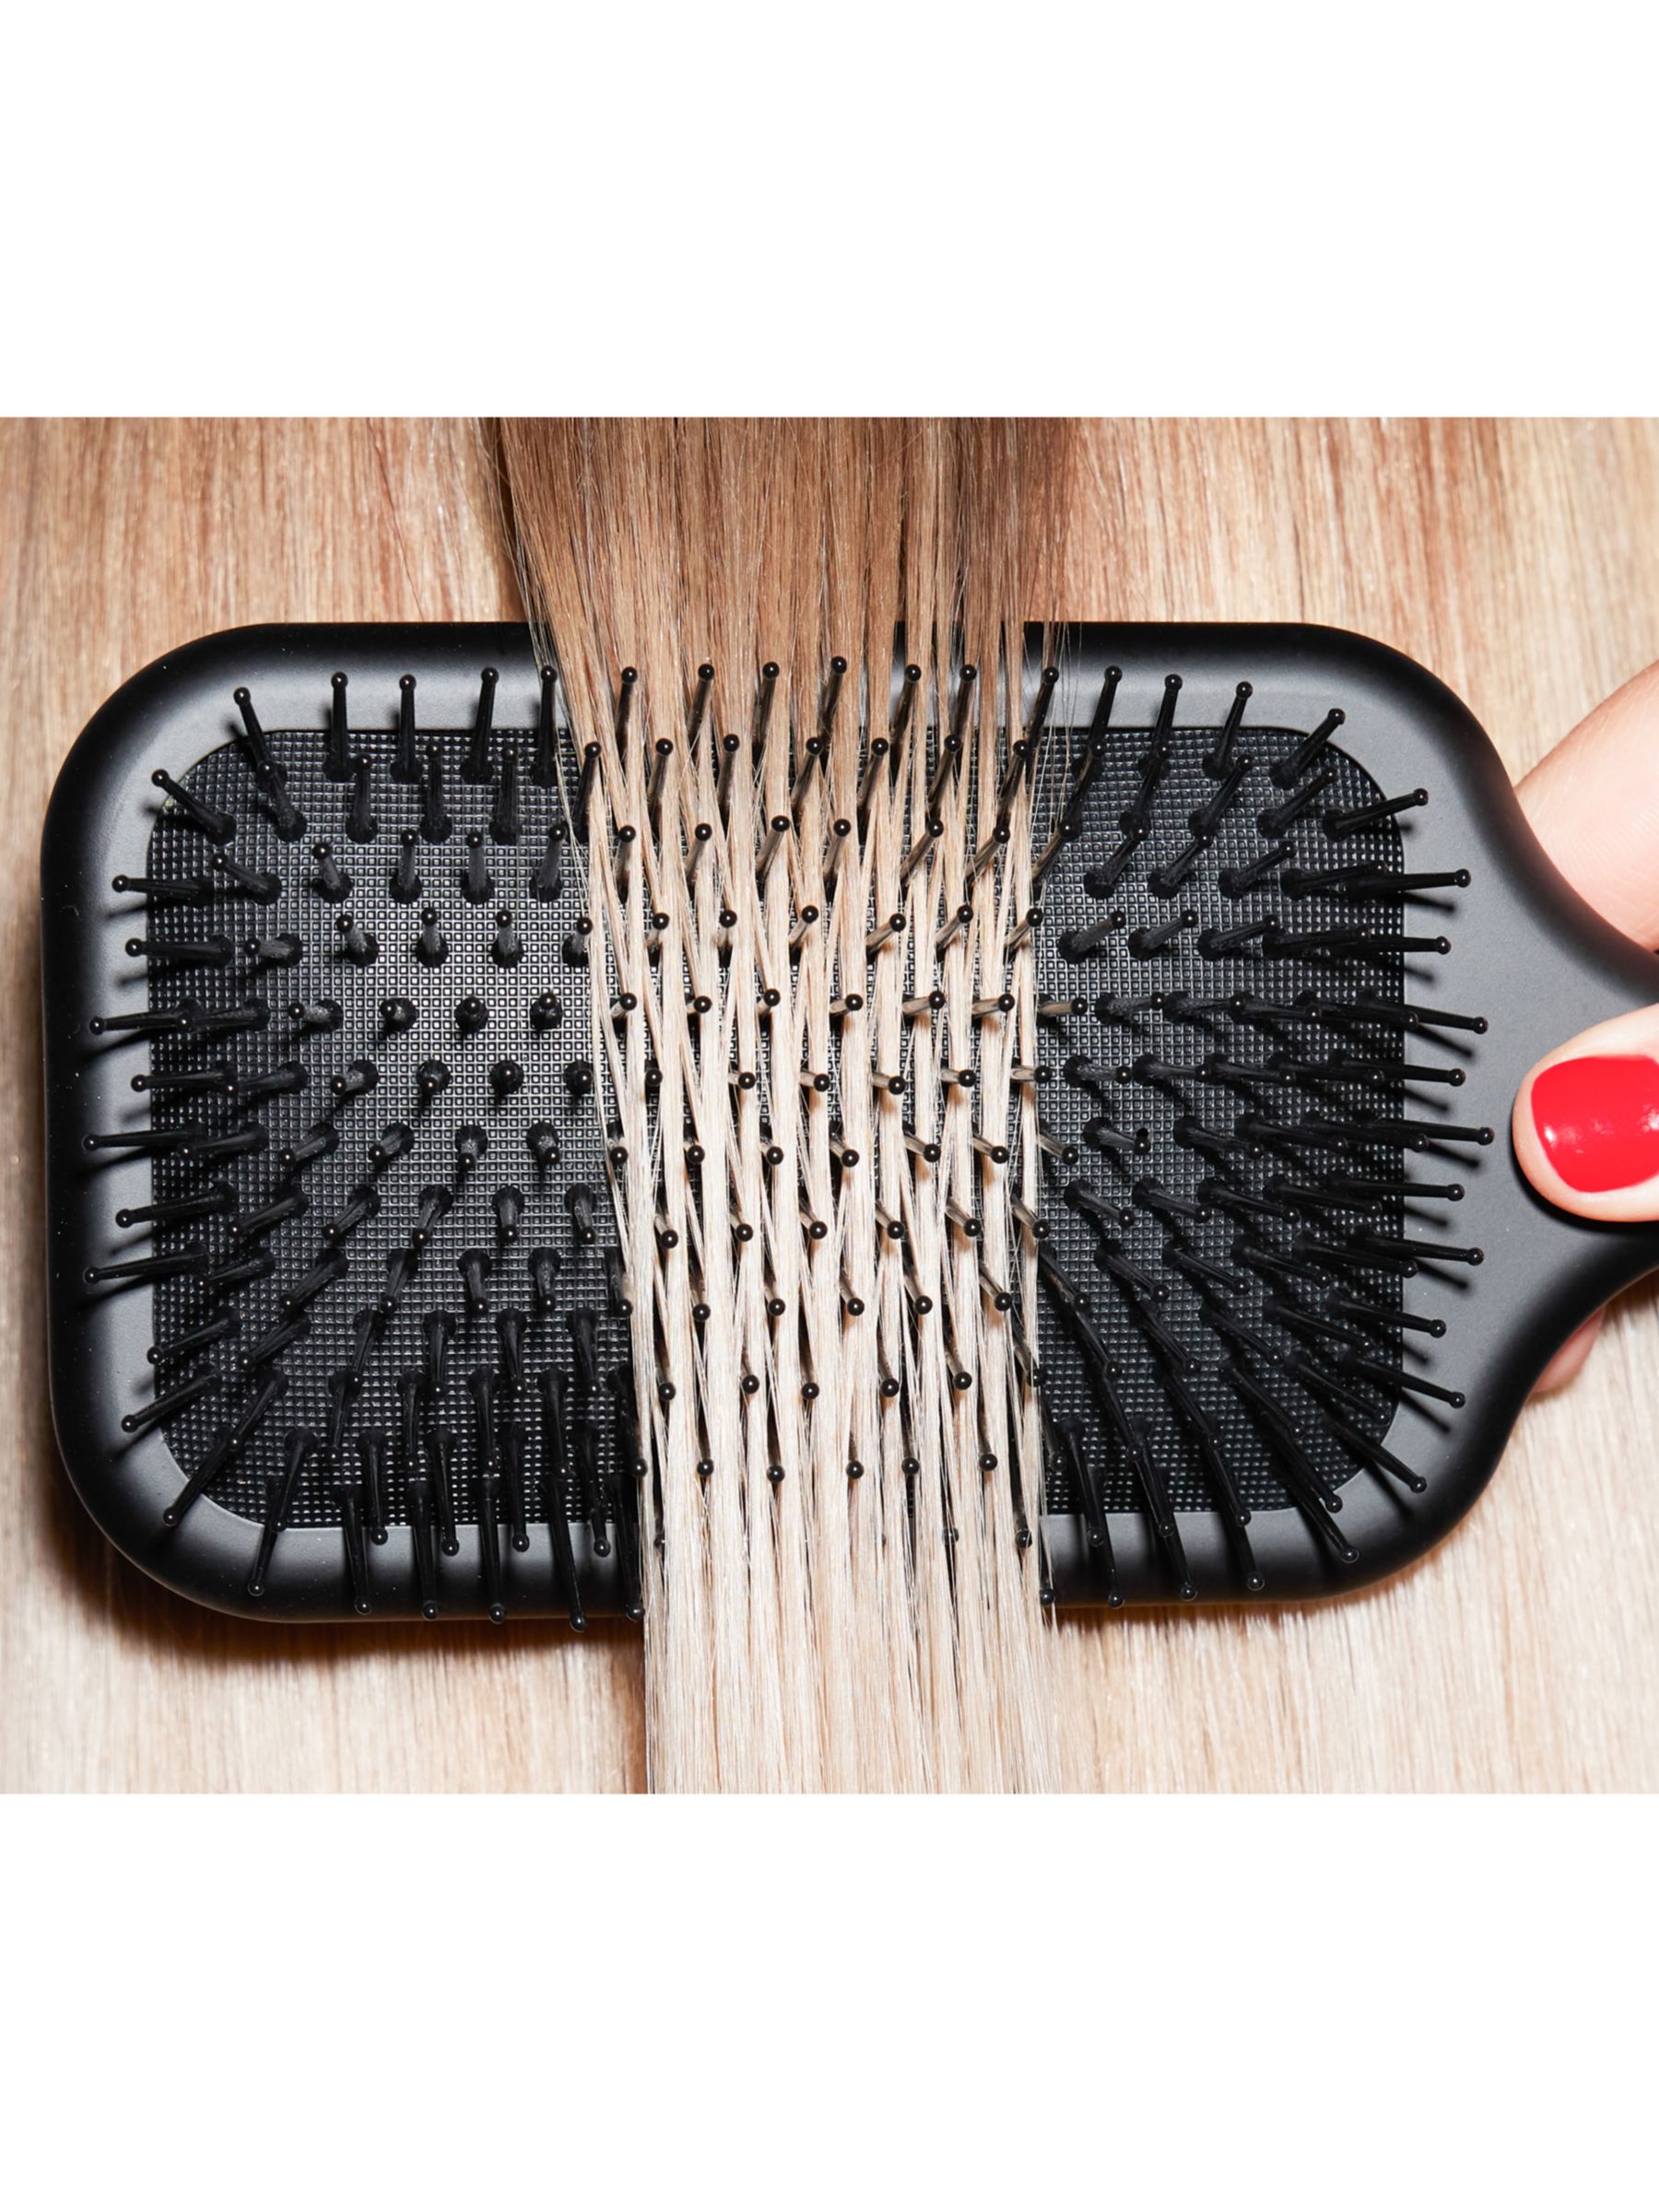 ghd All Rounder Paddle Brush 3